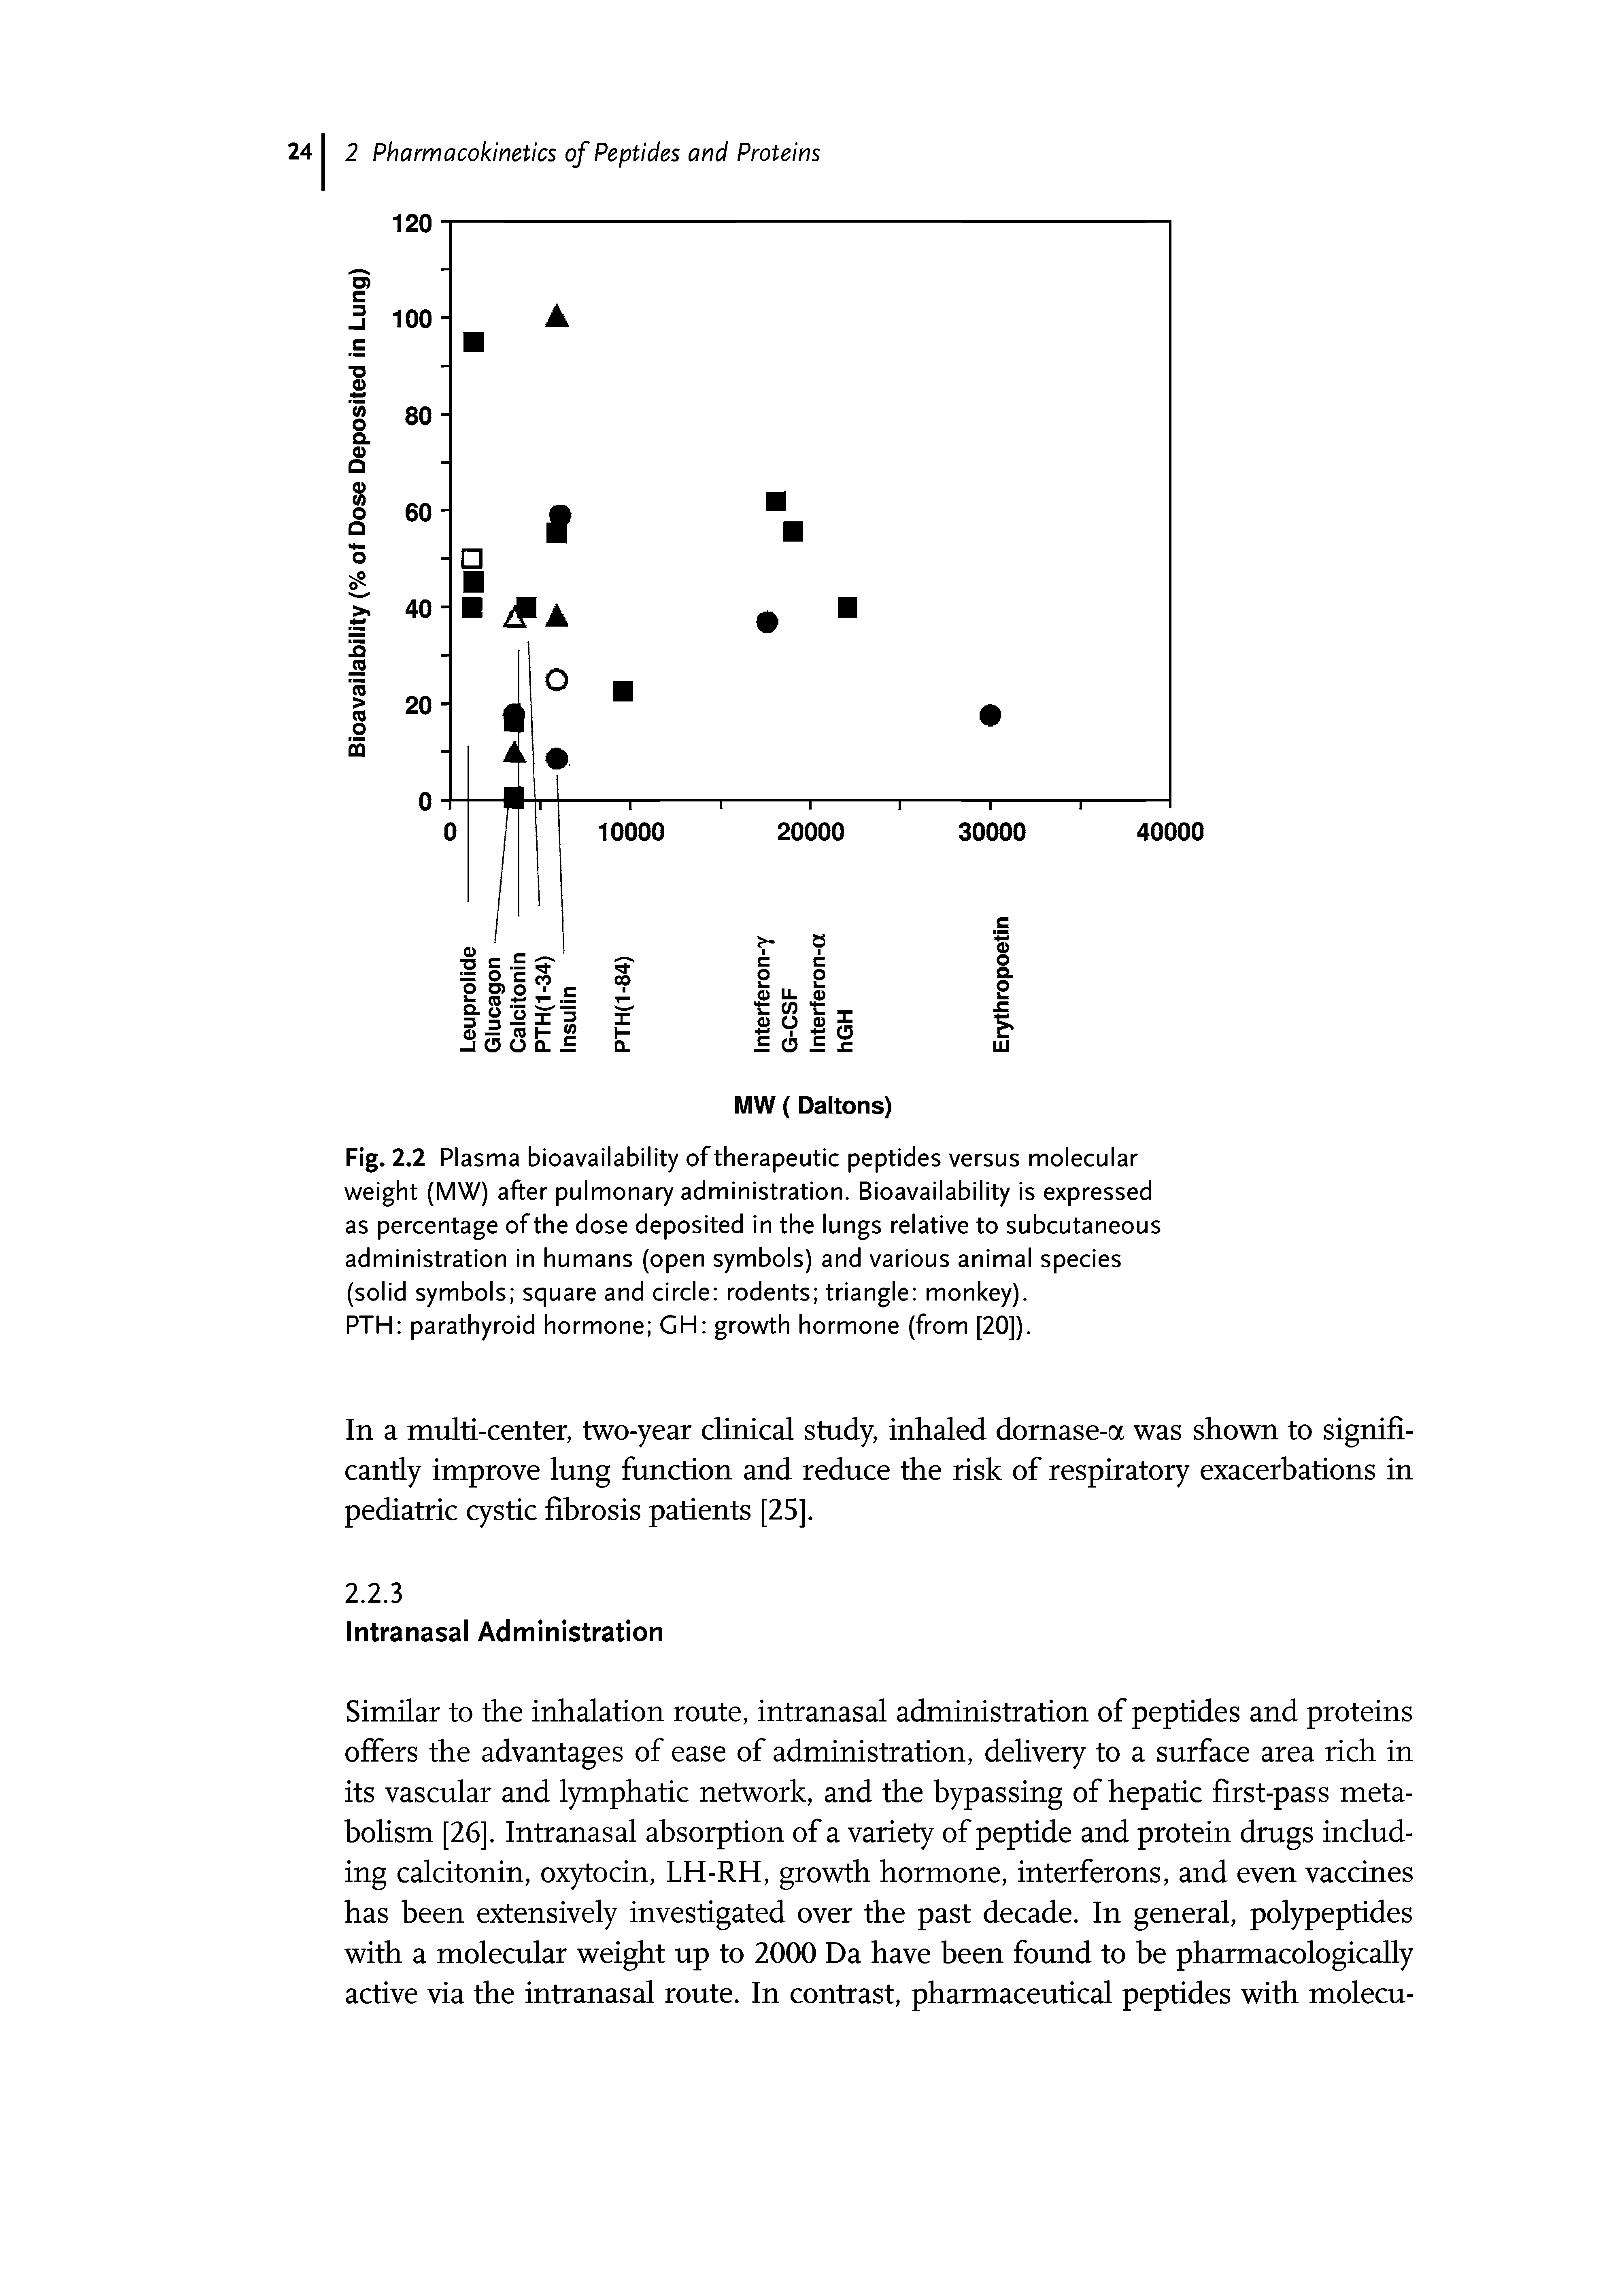 Fig. 2.2 Plasma bioavailability of therapeutic peptides versus molecular weight (MW) after pulmonary administration. Bioavailability is expressed as percentage of the dose deposited in the lungs relative to subcutaneous administration in humans (open symbols) and various animal species (solid symbols square and circle rodents triangle monkey).